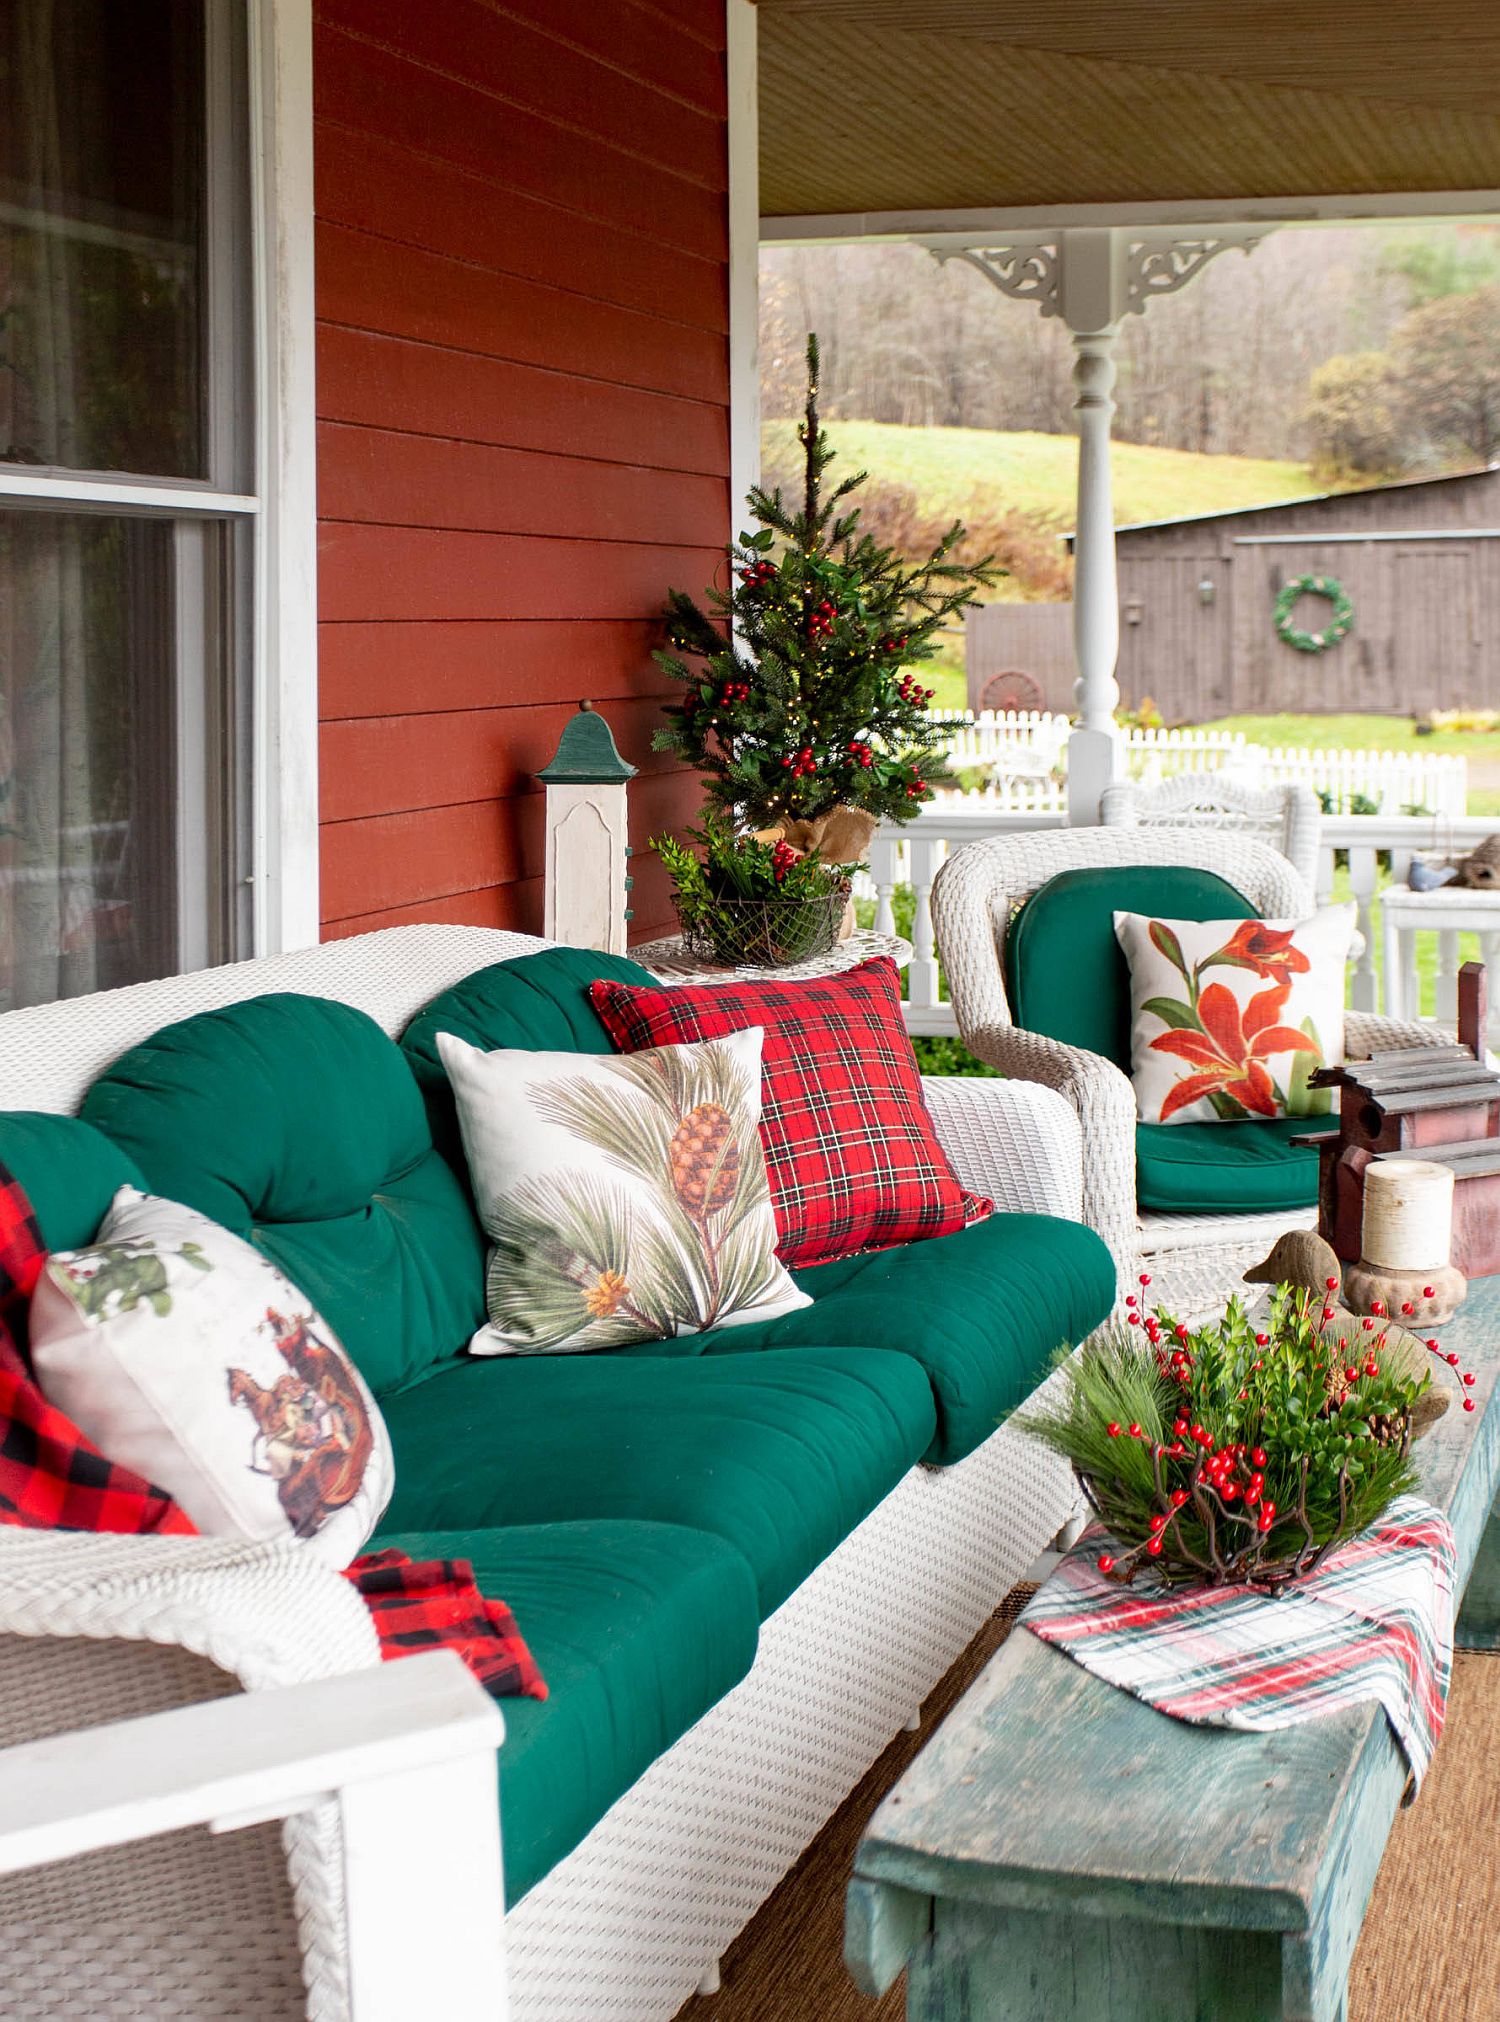 Change the colors of accent pillows and cushions of the outdoor couch to create a more festive porch